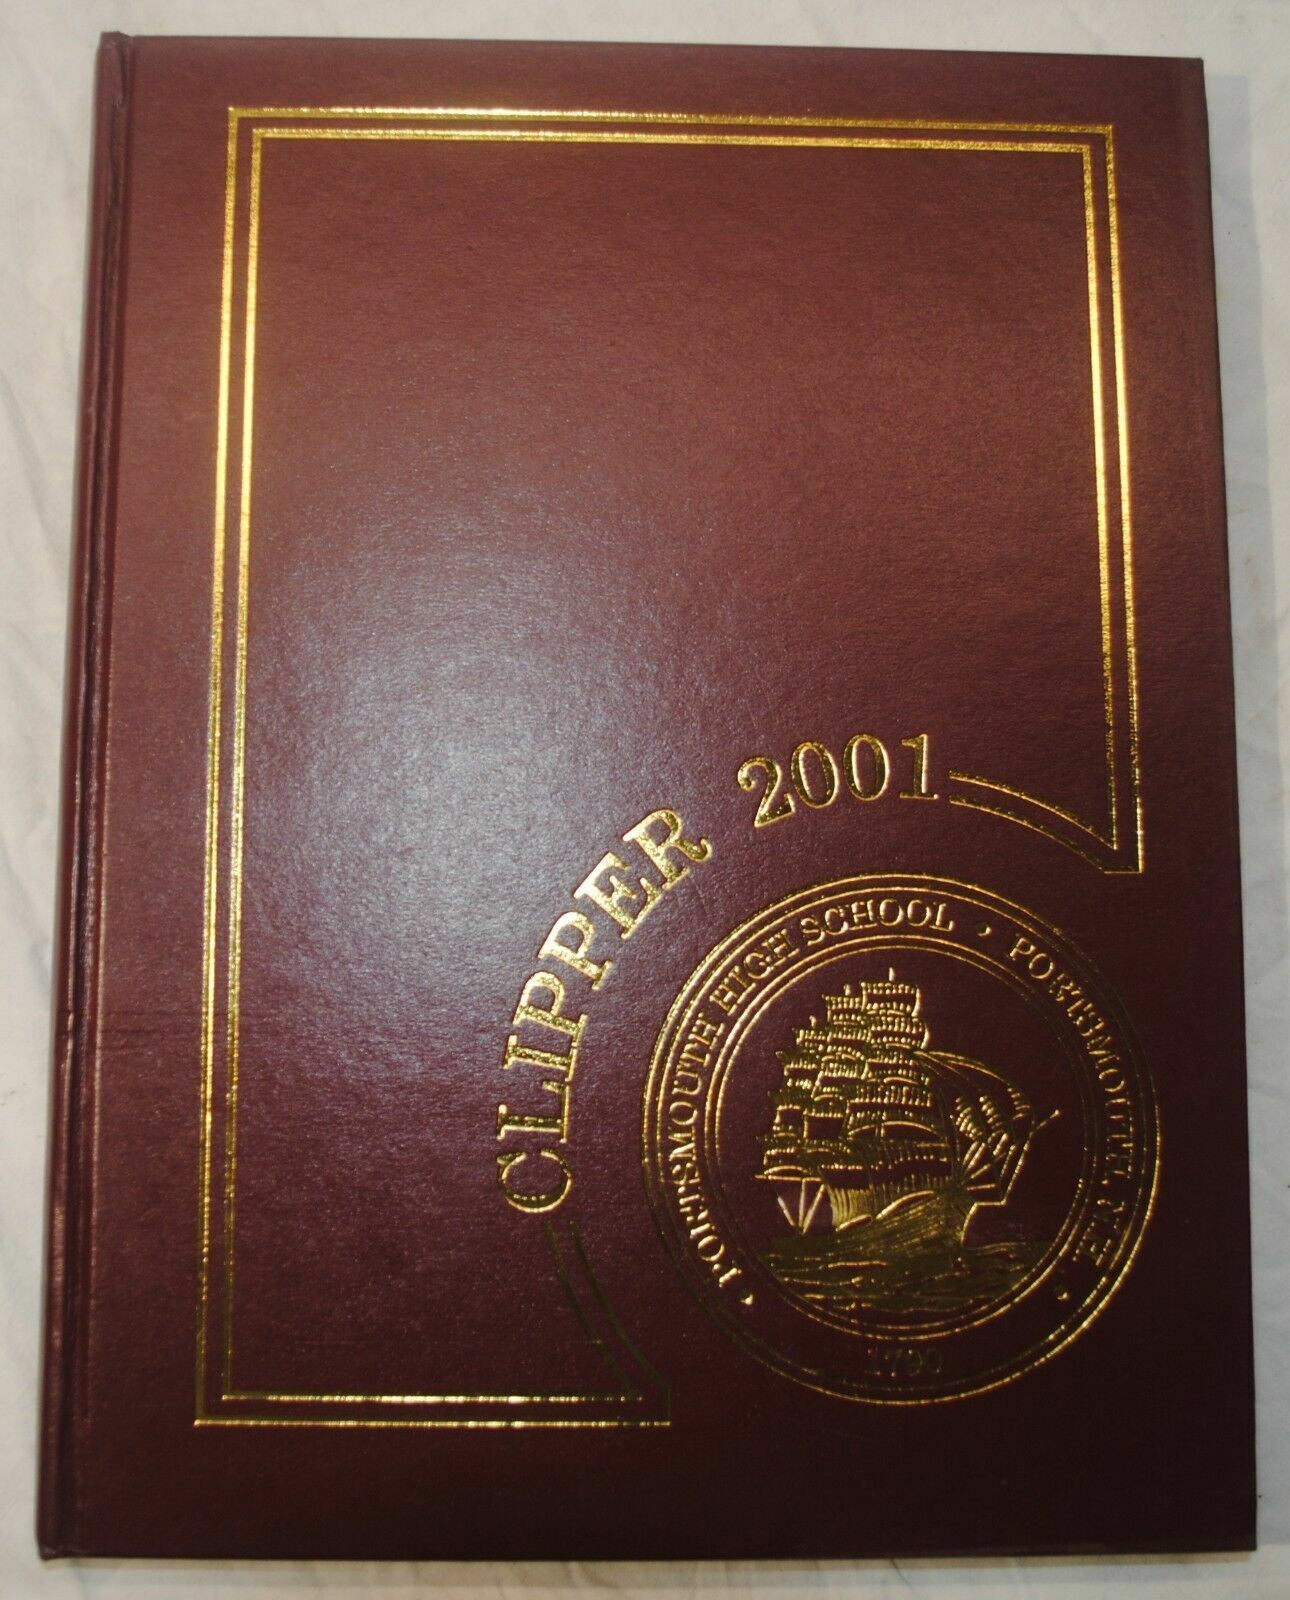 Portsmouth New Hampshire yearbook class of 2001